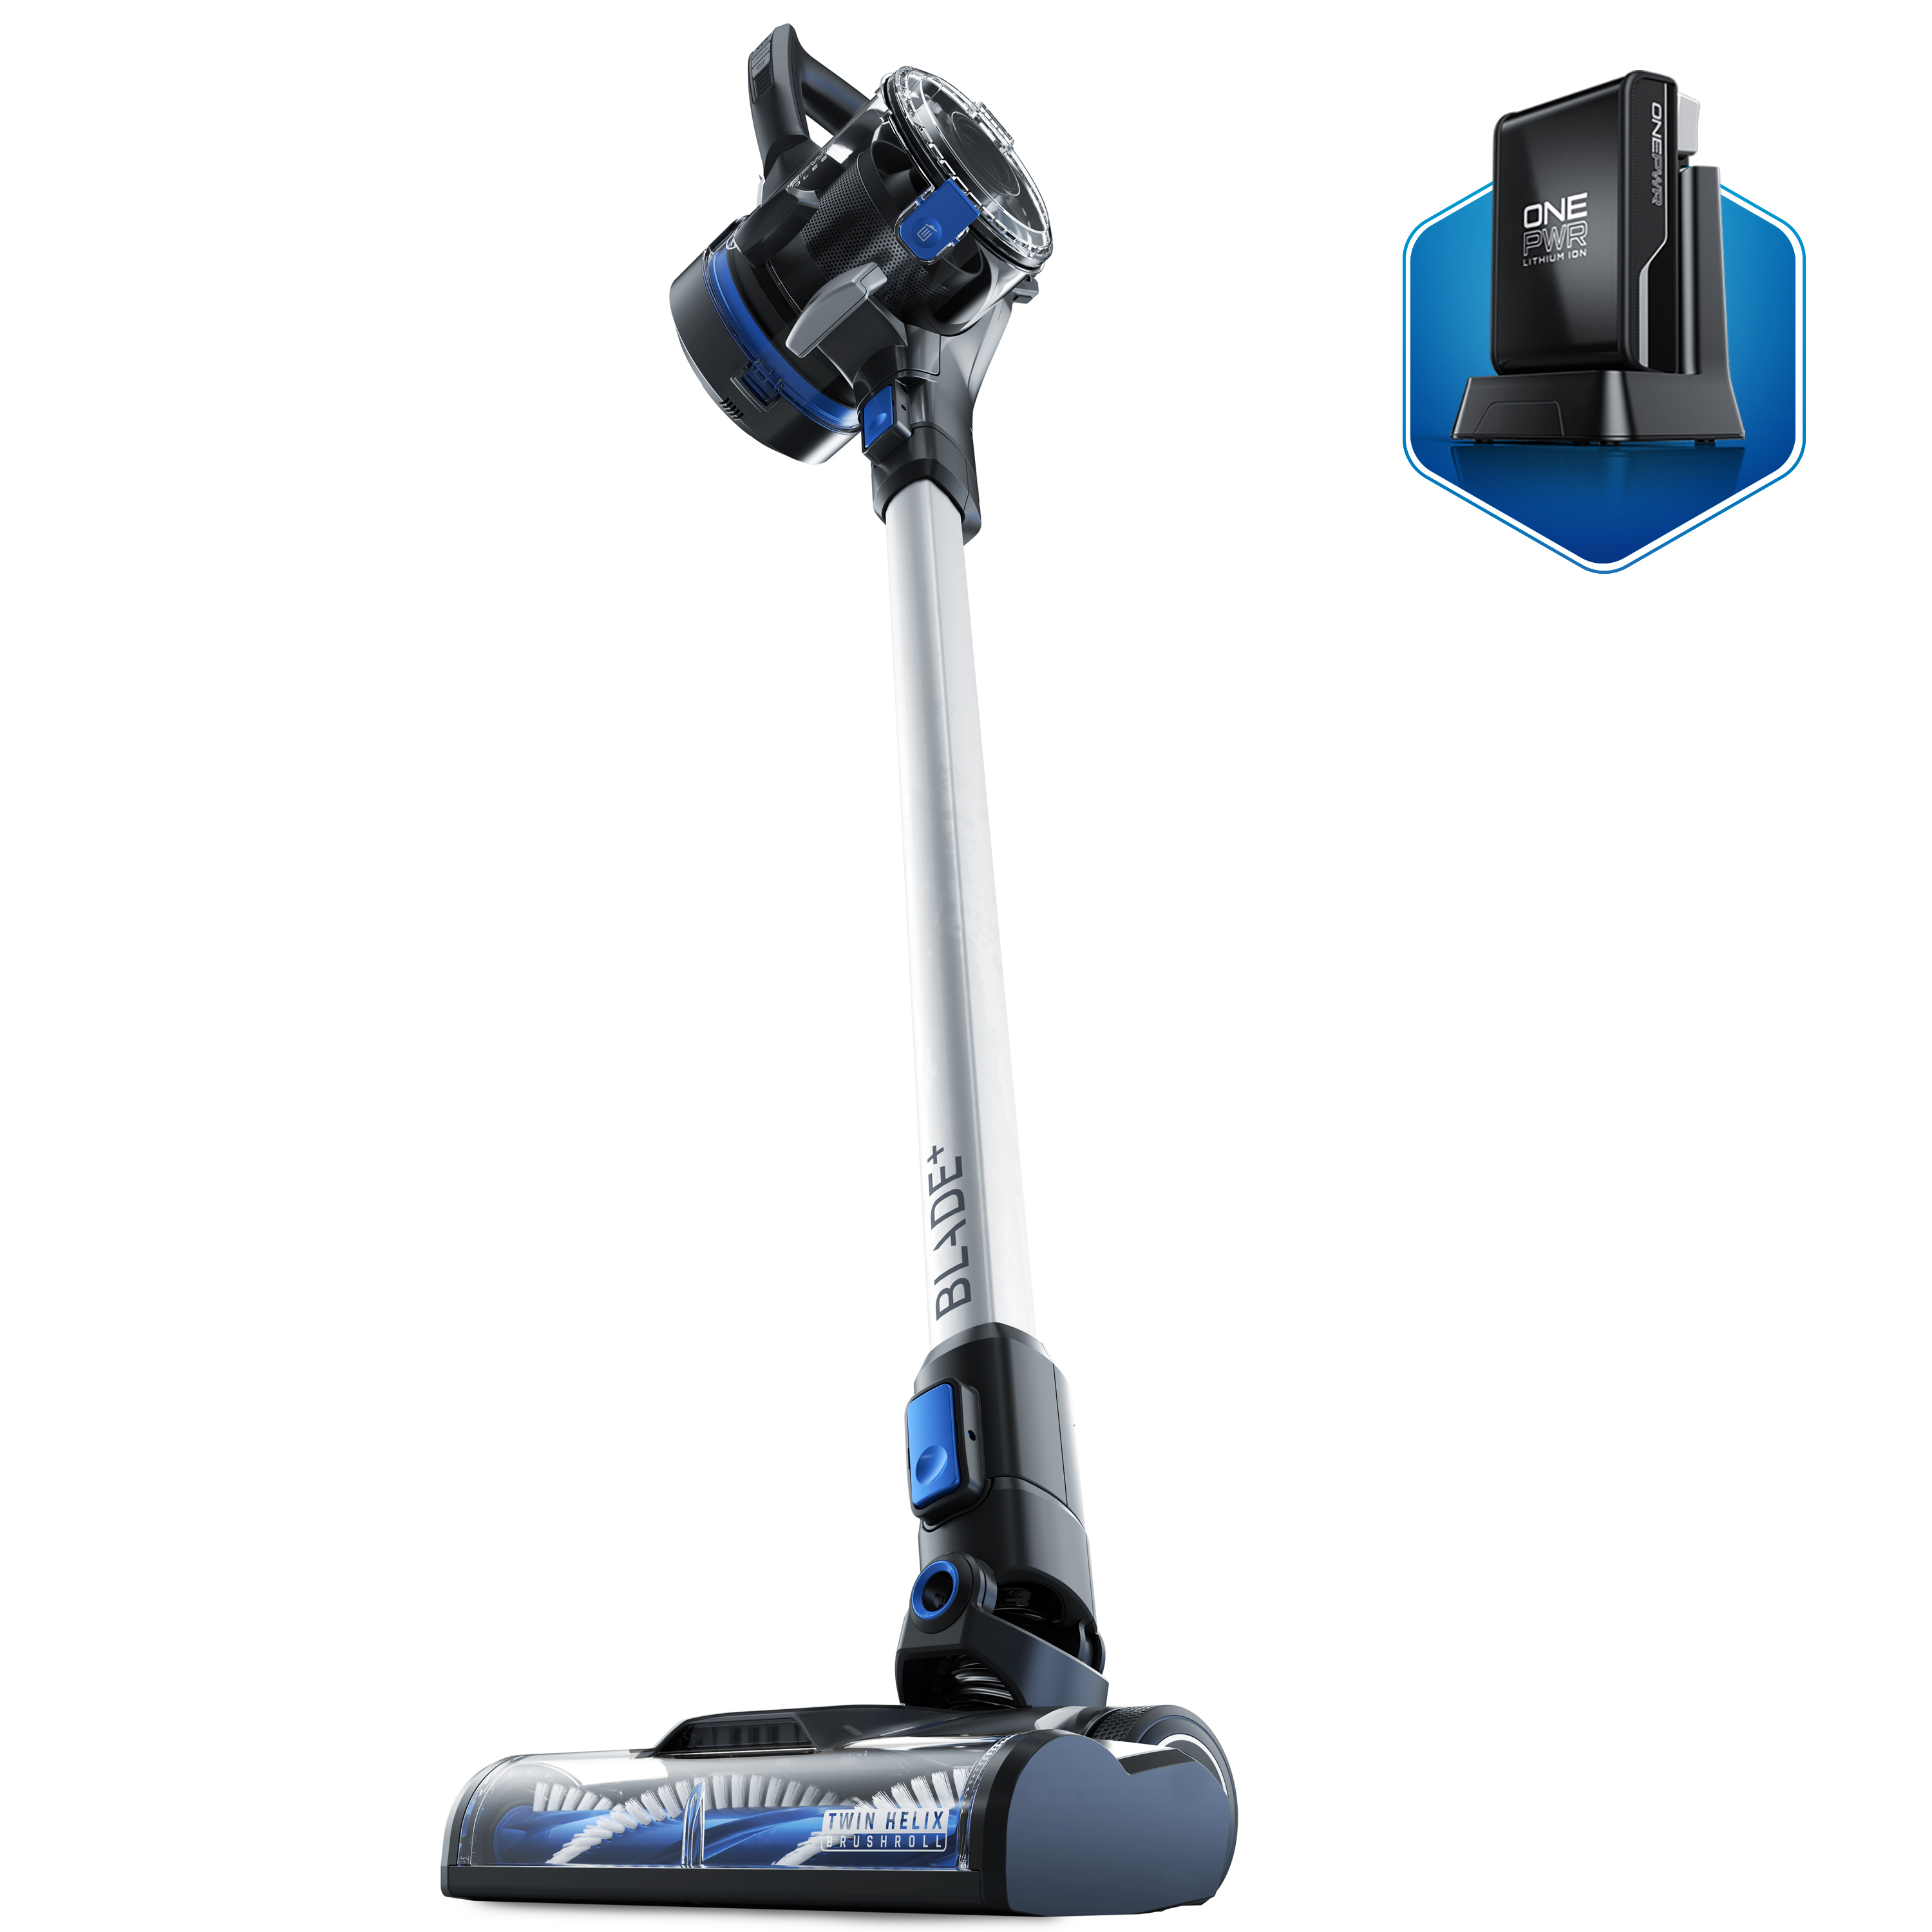 Hoover ONEPWR Blade+ Cordless Stick Vacuum Cleaner, BH53310 - image 1 of 15